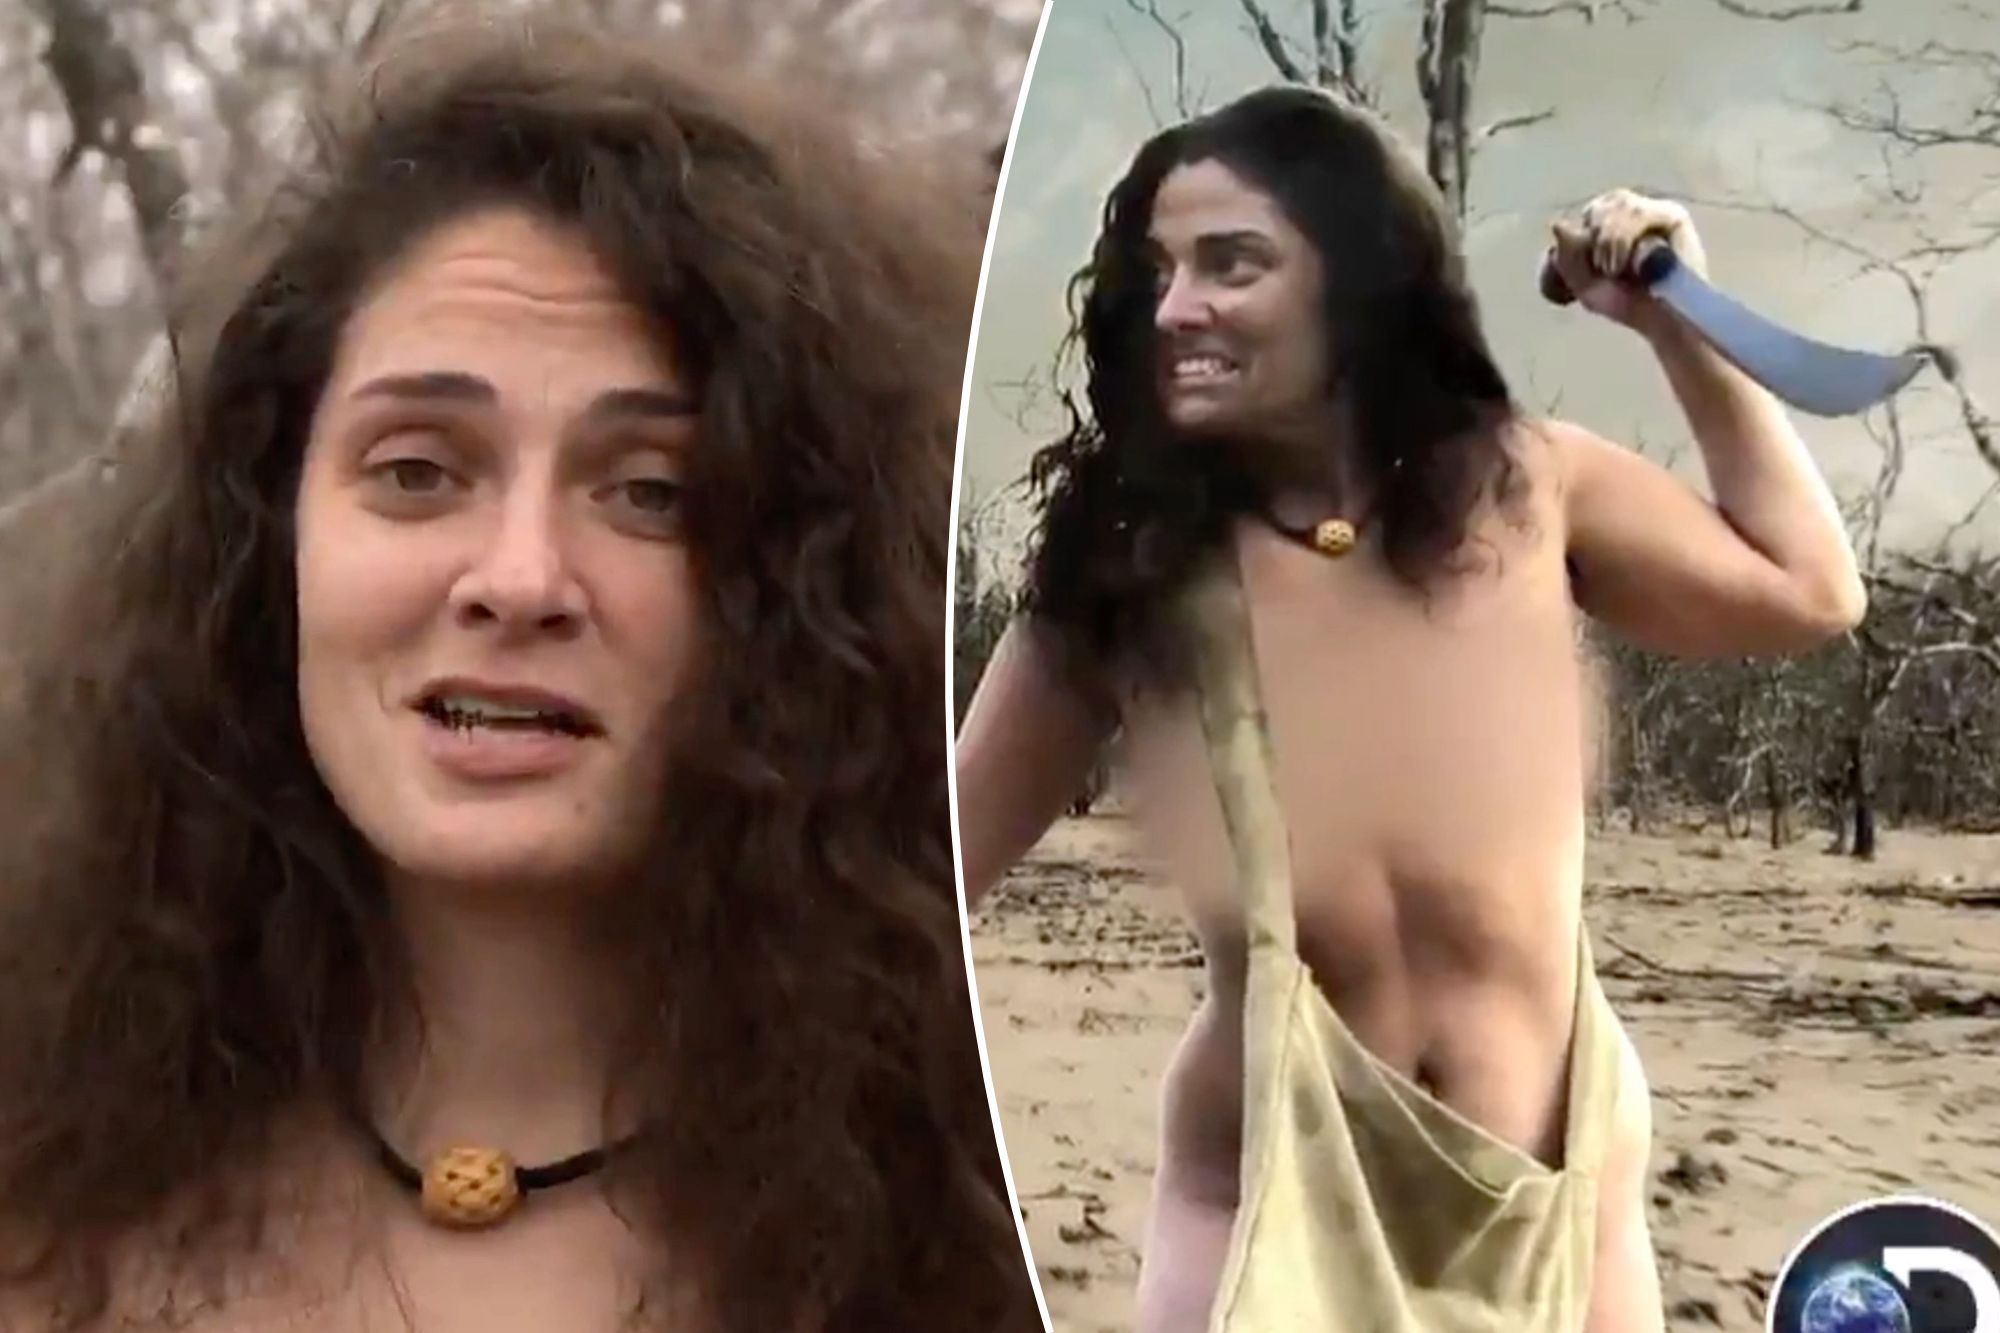 david todd recommends Michelle Naked And Afraid